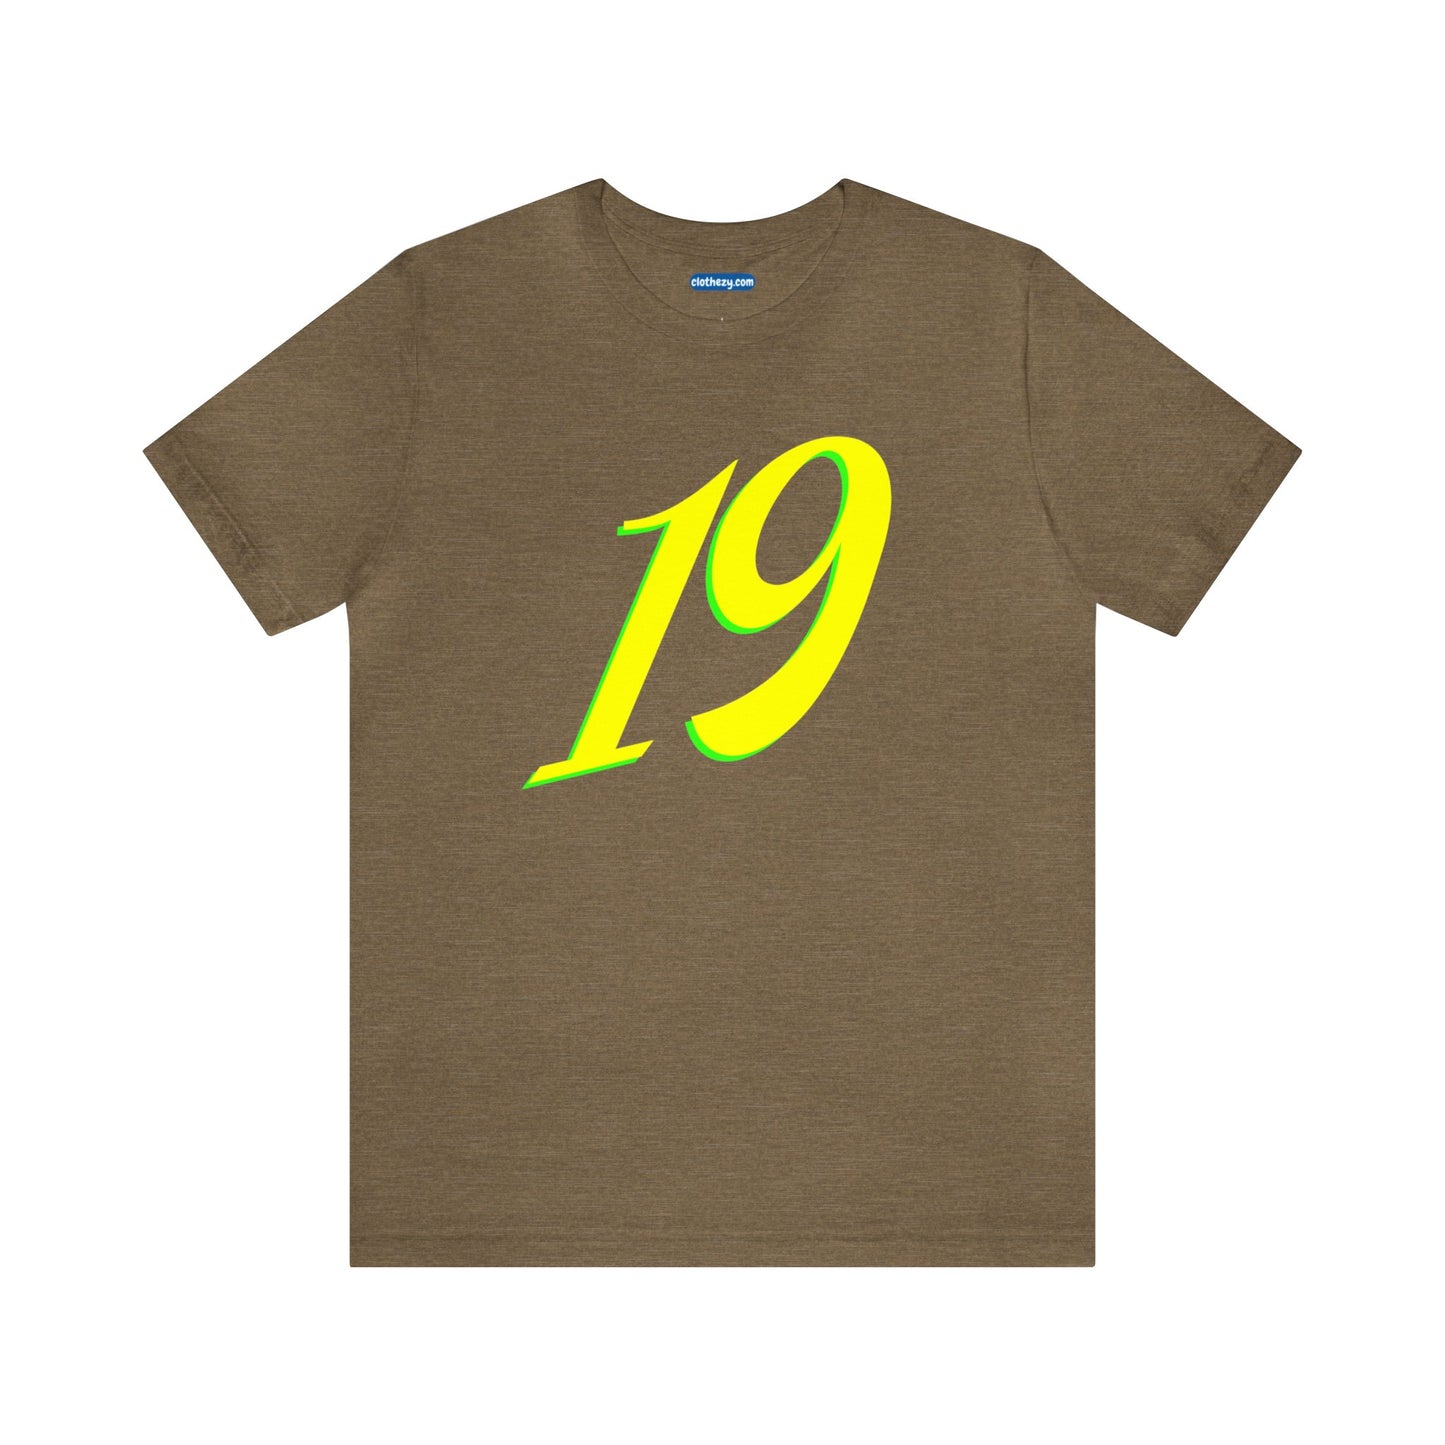 Number 19 Design - Soft Cotton Tee for birthdays and celebrations, Gift for friends and family, Multiple Options by clothezy.com in Olive Heather Size Small - Buy Now